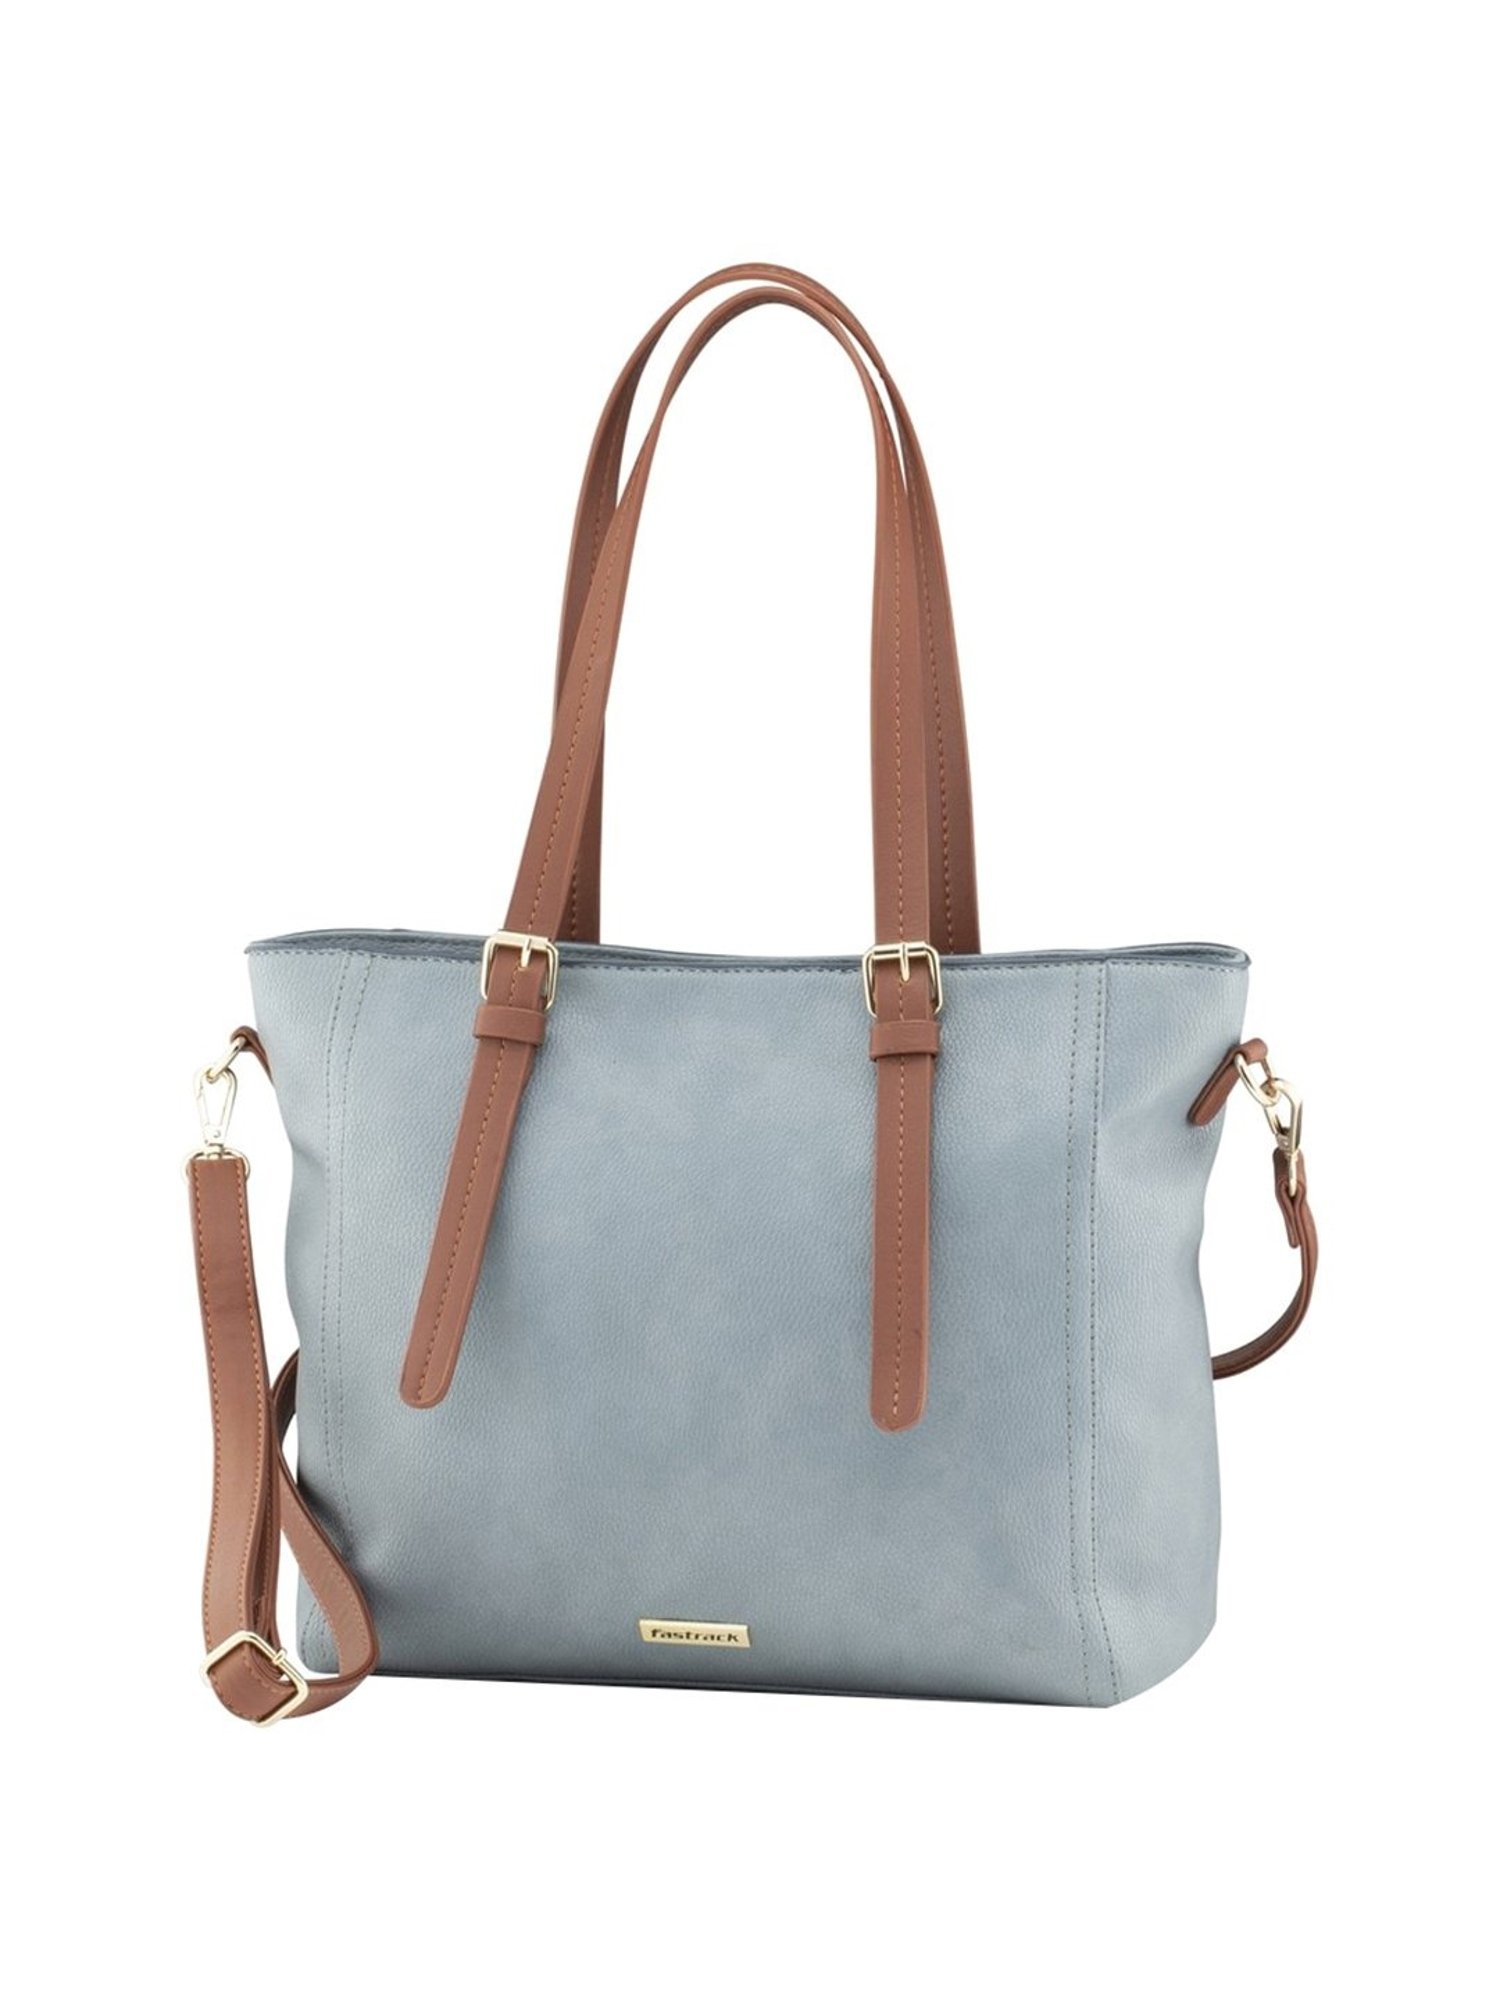 Fastrack Sling and Cross bags  Buy Fastrack Powder Blue Sling Bag Online   Nykaa Fashion